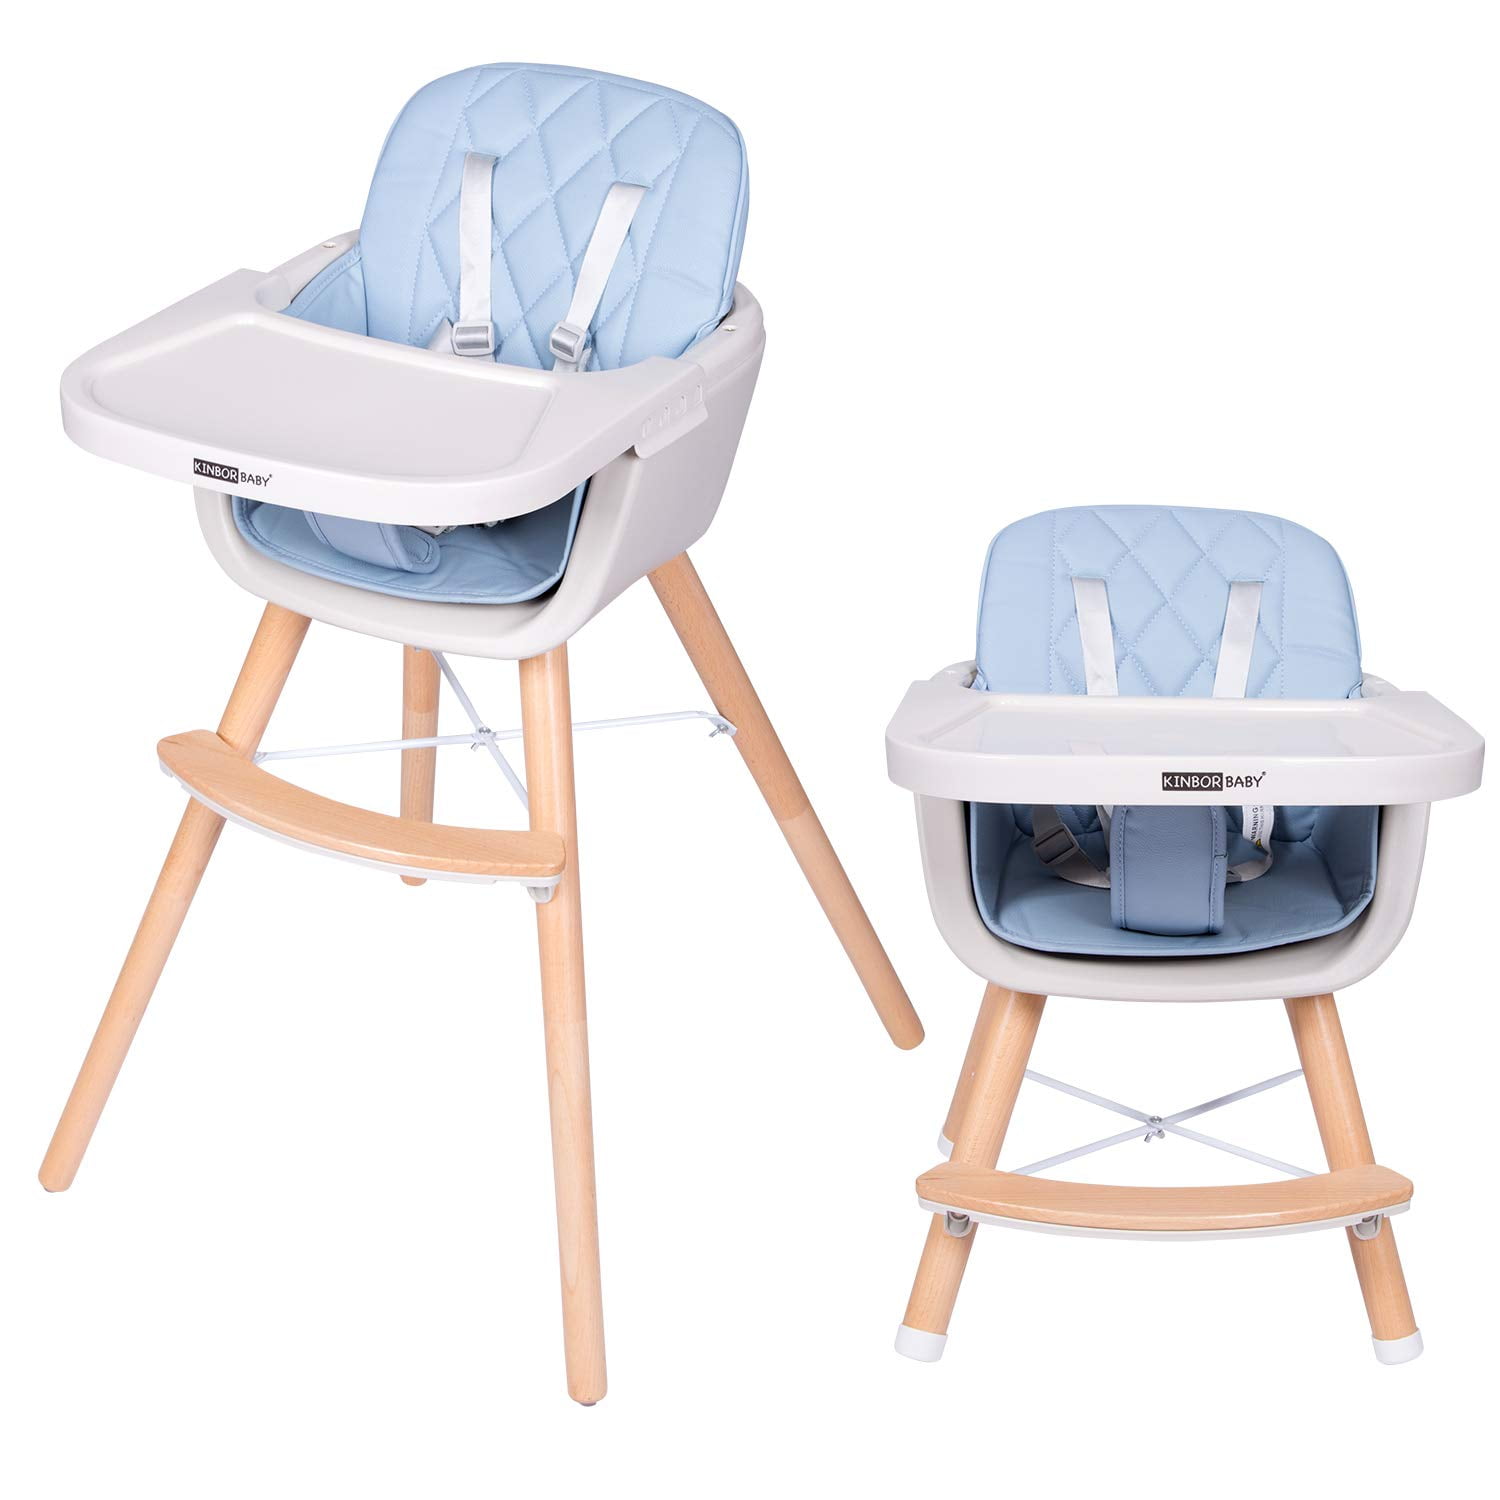 Kinbor Baby Seat with Removable Tray Converts into a Booster Seat and Highchair 